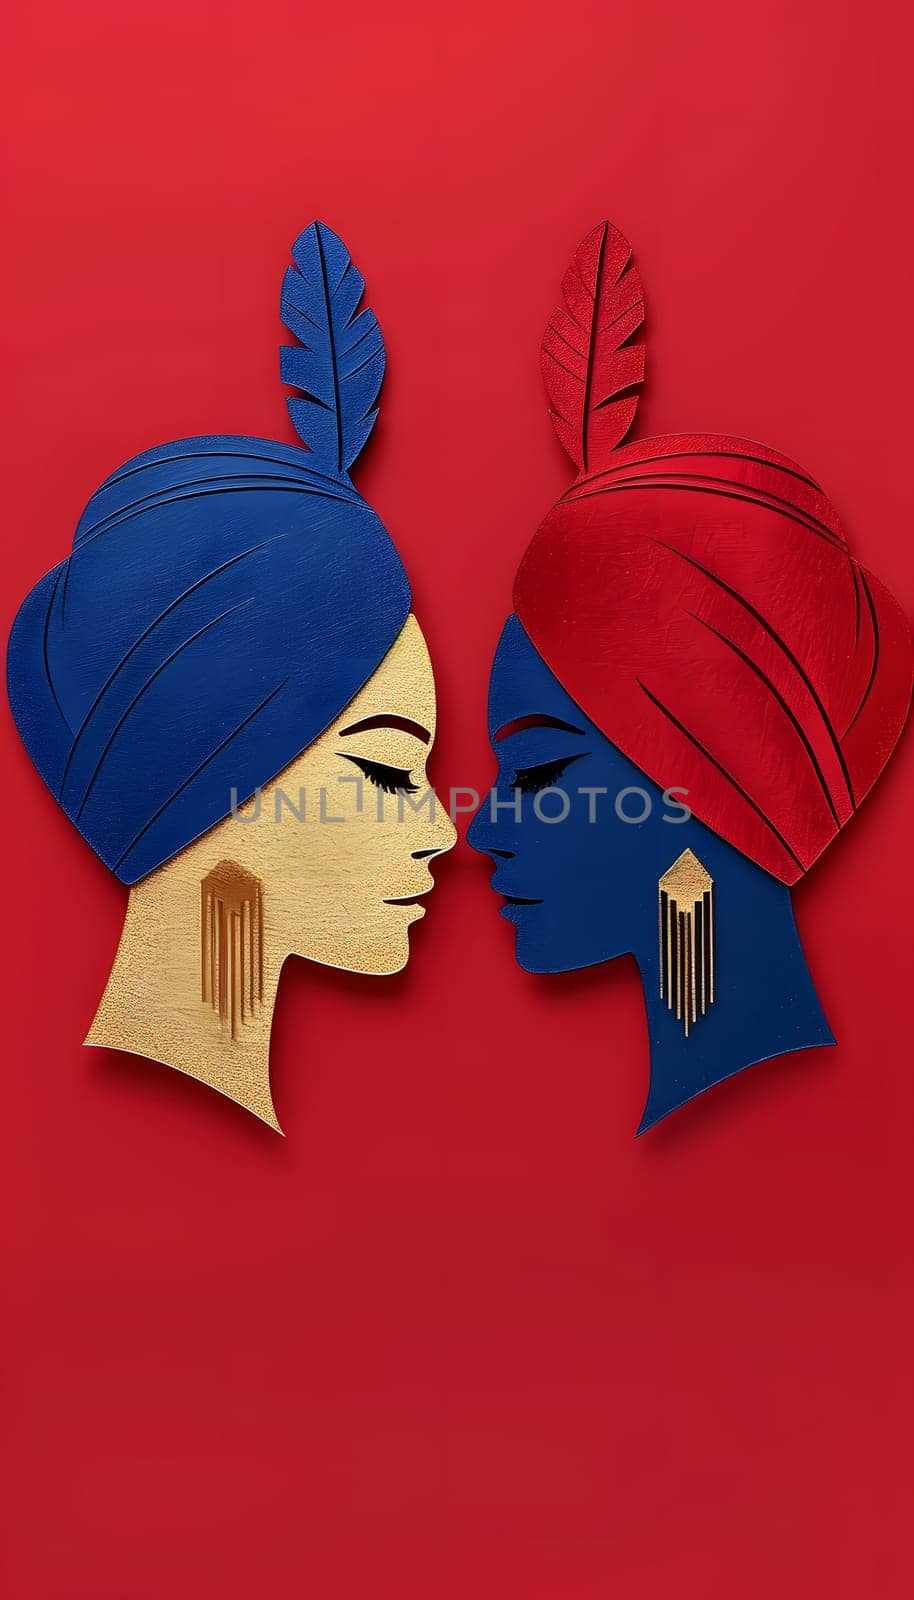 two women wearing turbans and earrings are looking at each other on a red background. High quality photo